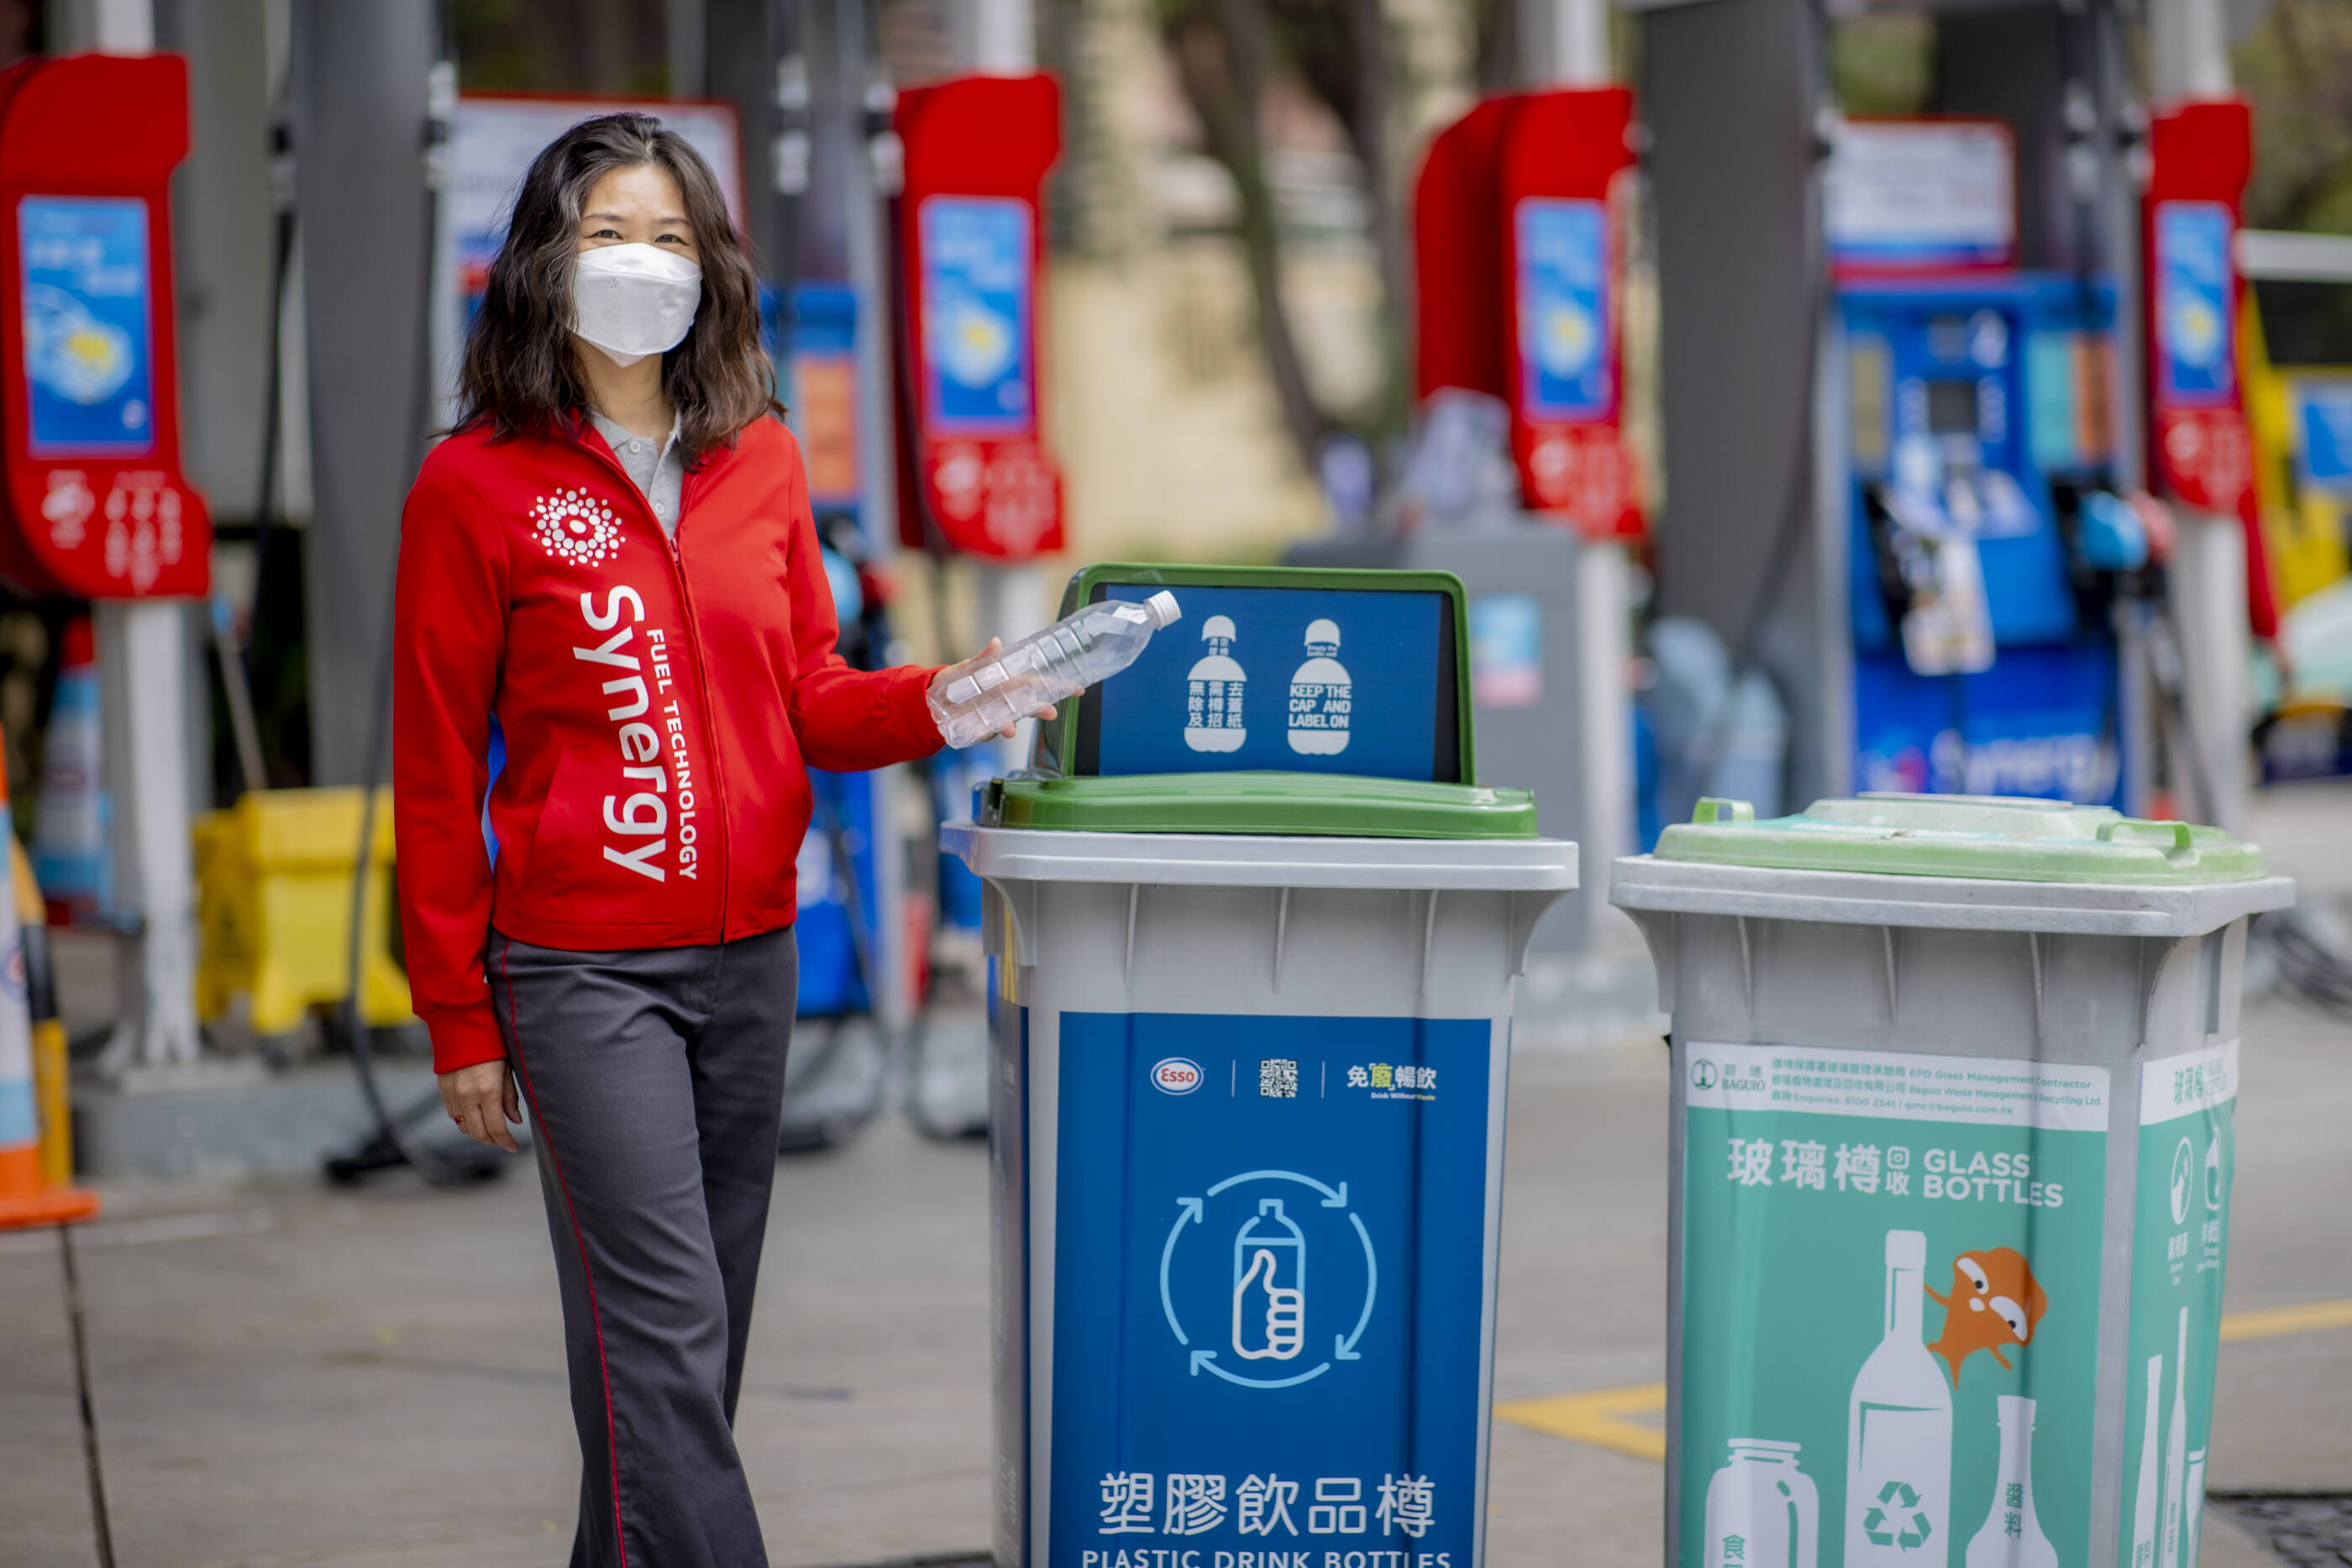 Image Mabel Leung, Asia Pacific Retail Sales Director takes action to support plastic bottle recycling.